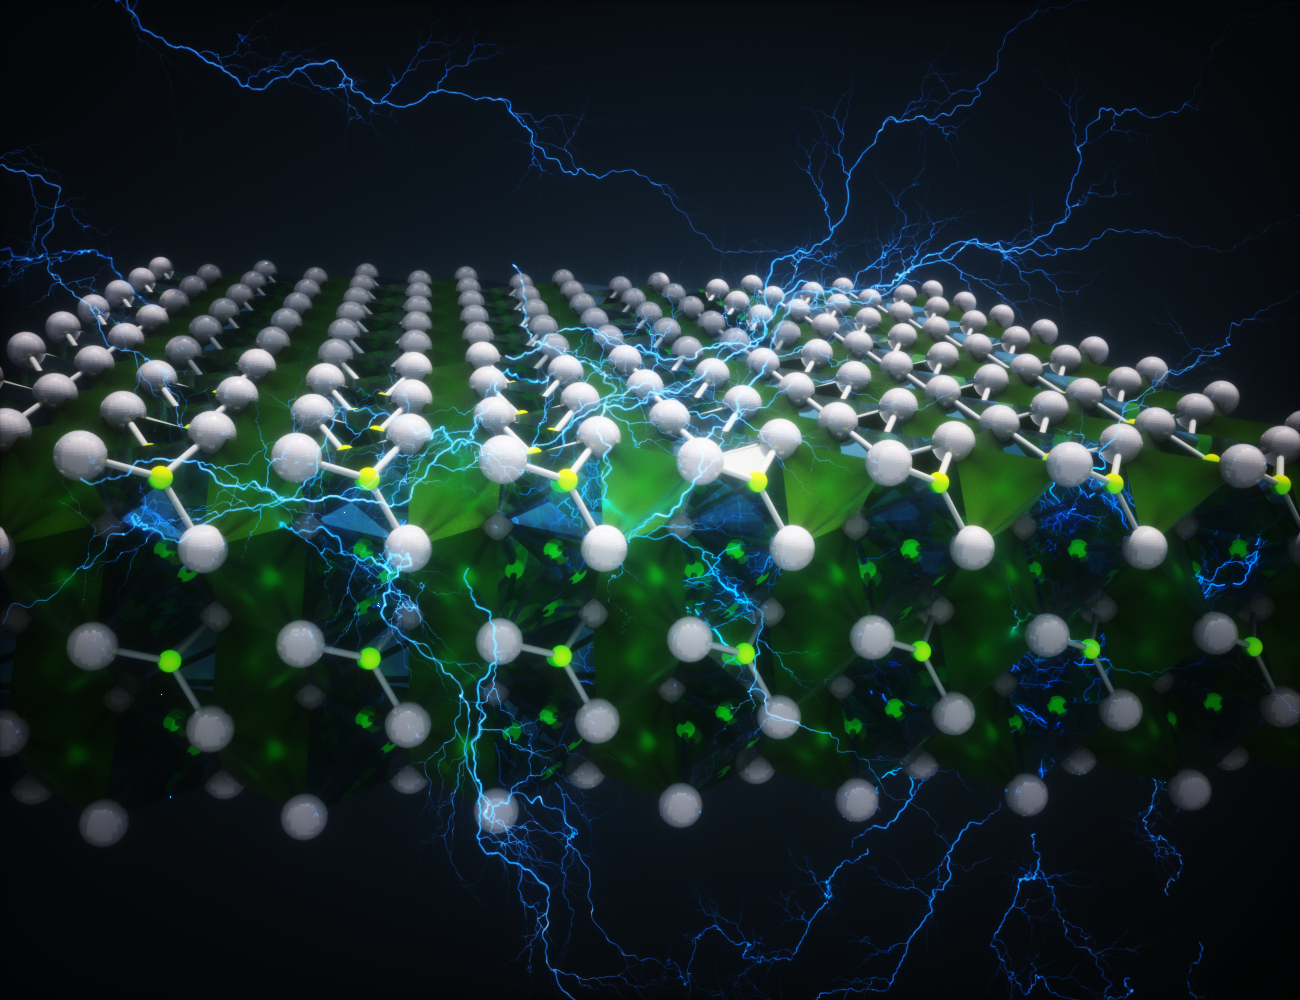 Artistic 3D depiction of hafnium oxide atomic structure (white and yellow spheres interconnected by green and blue tetragons), suffused with electrical arcs (bright blue) suggestive of an external electric field.